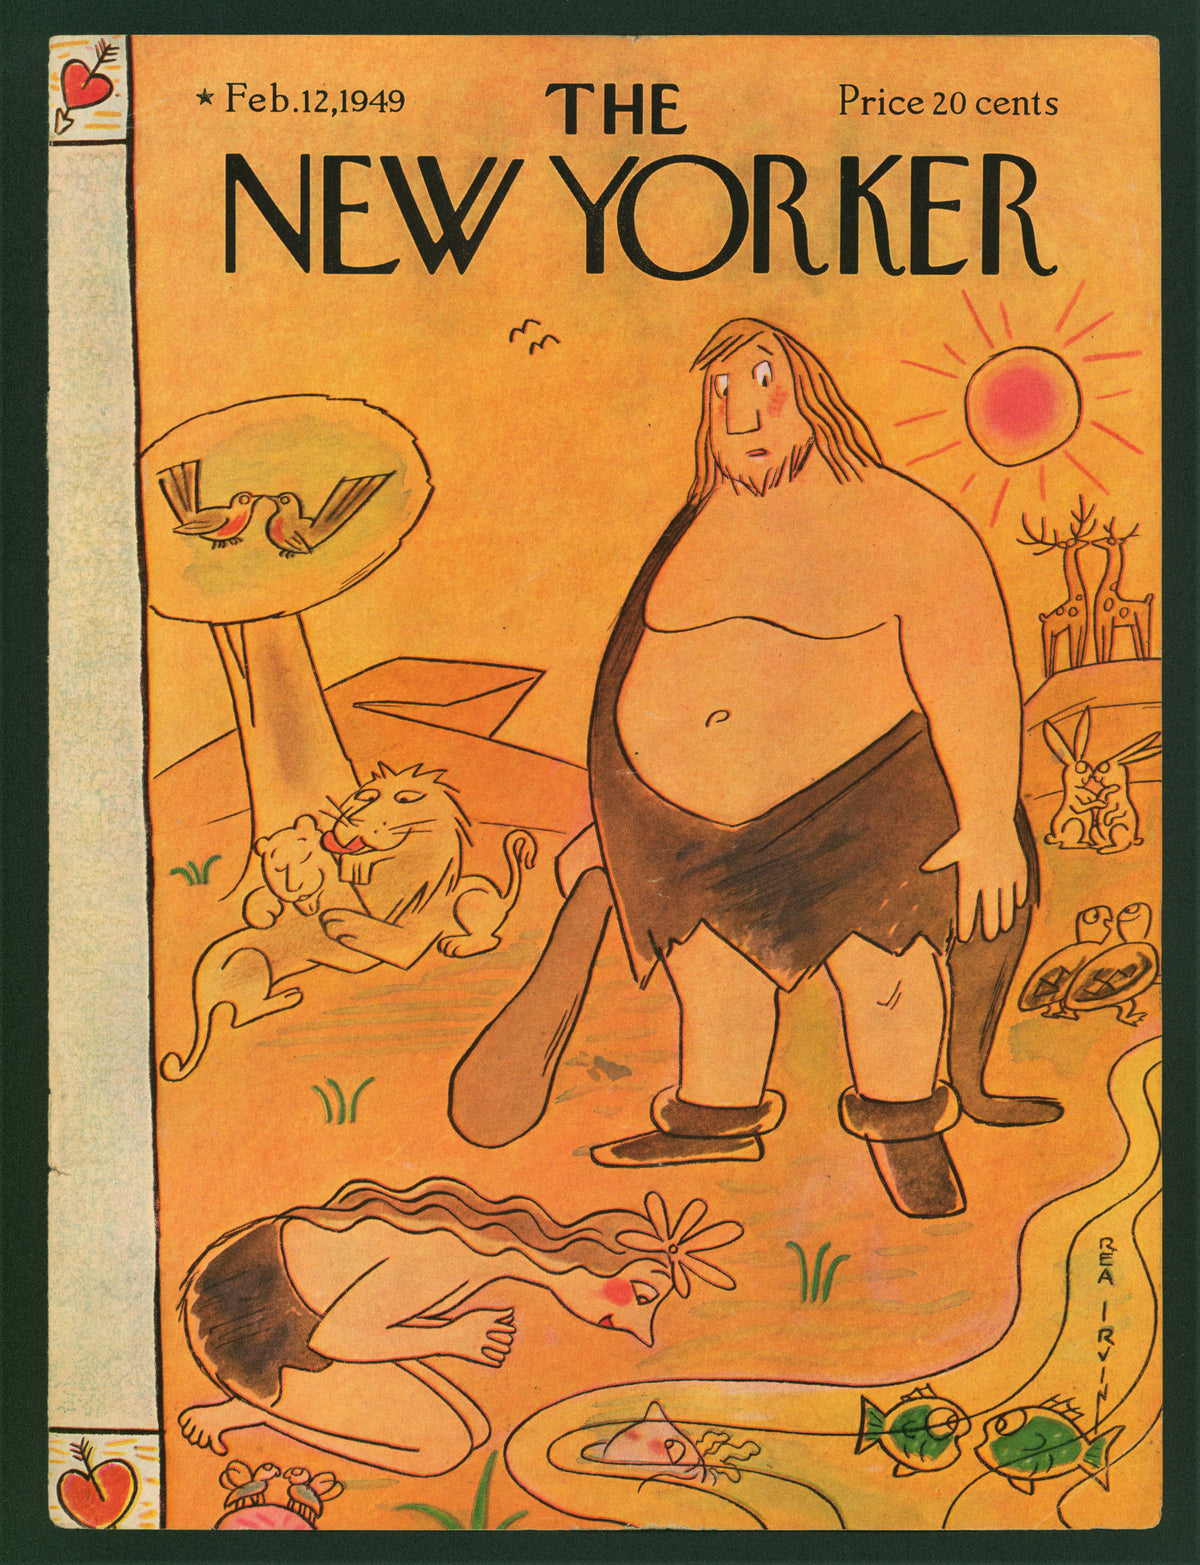 Stone Age- The New Yorker - Authentic Vintage Antique Print